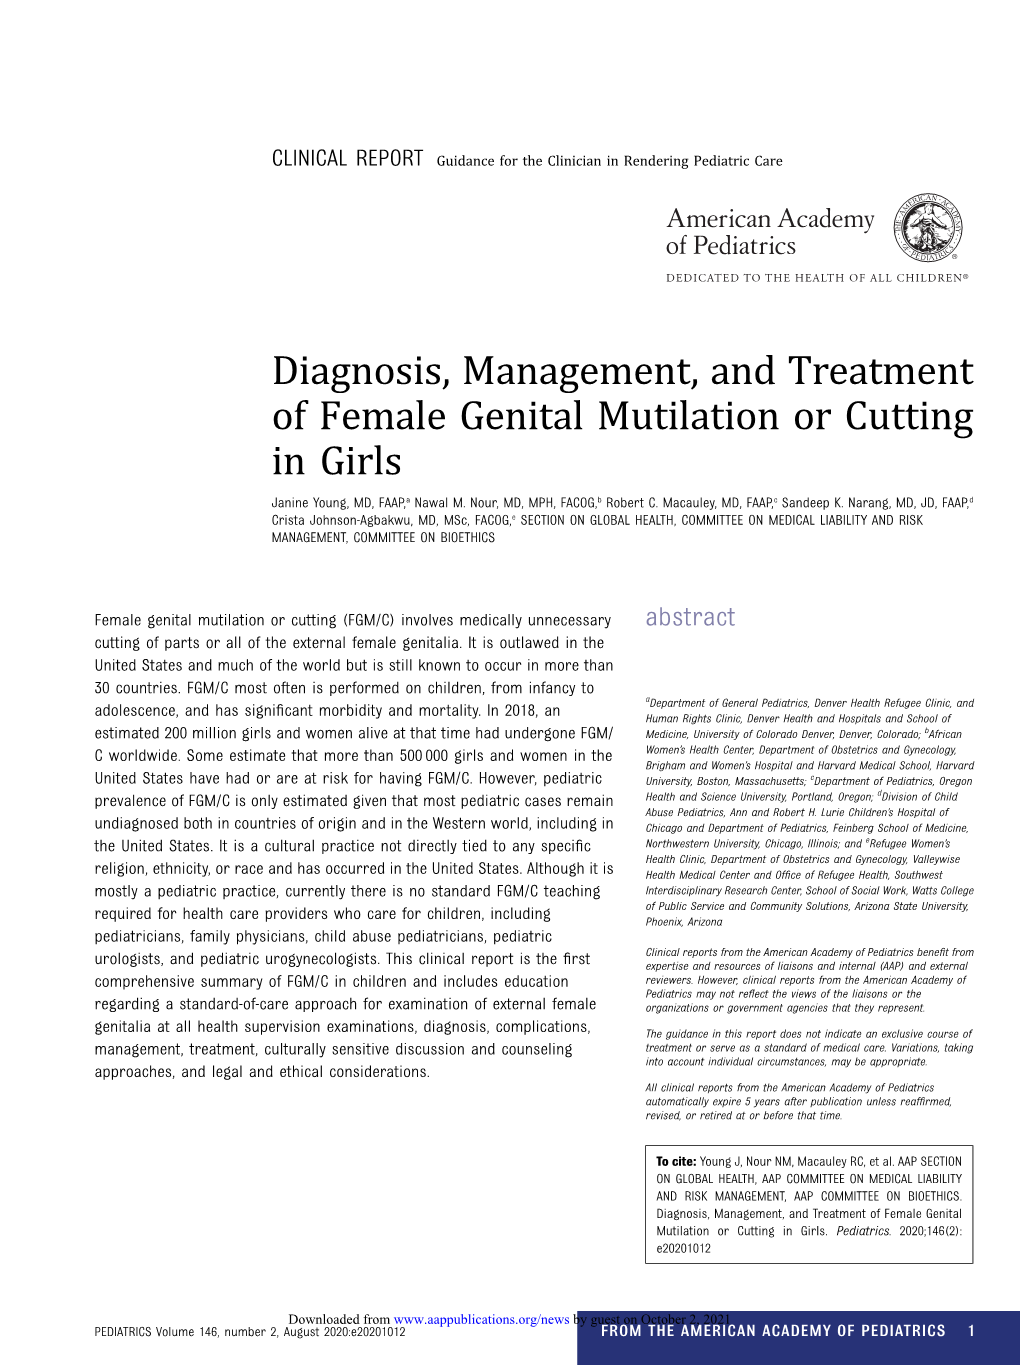 Diagnosis, Management, and Treatment of Female Genital Mutilation Or Cutting in Girls Janine Young, MD, FAAP,A Nawal M